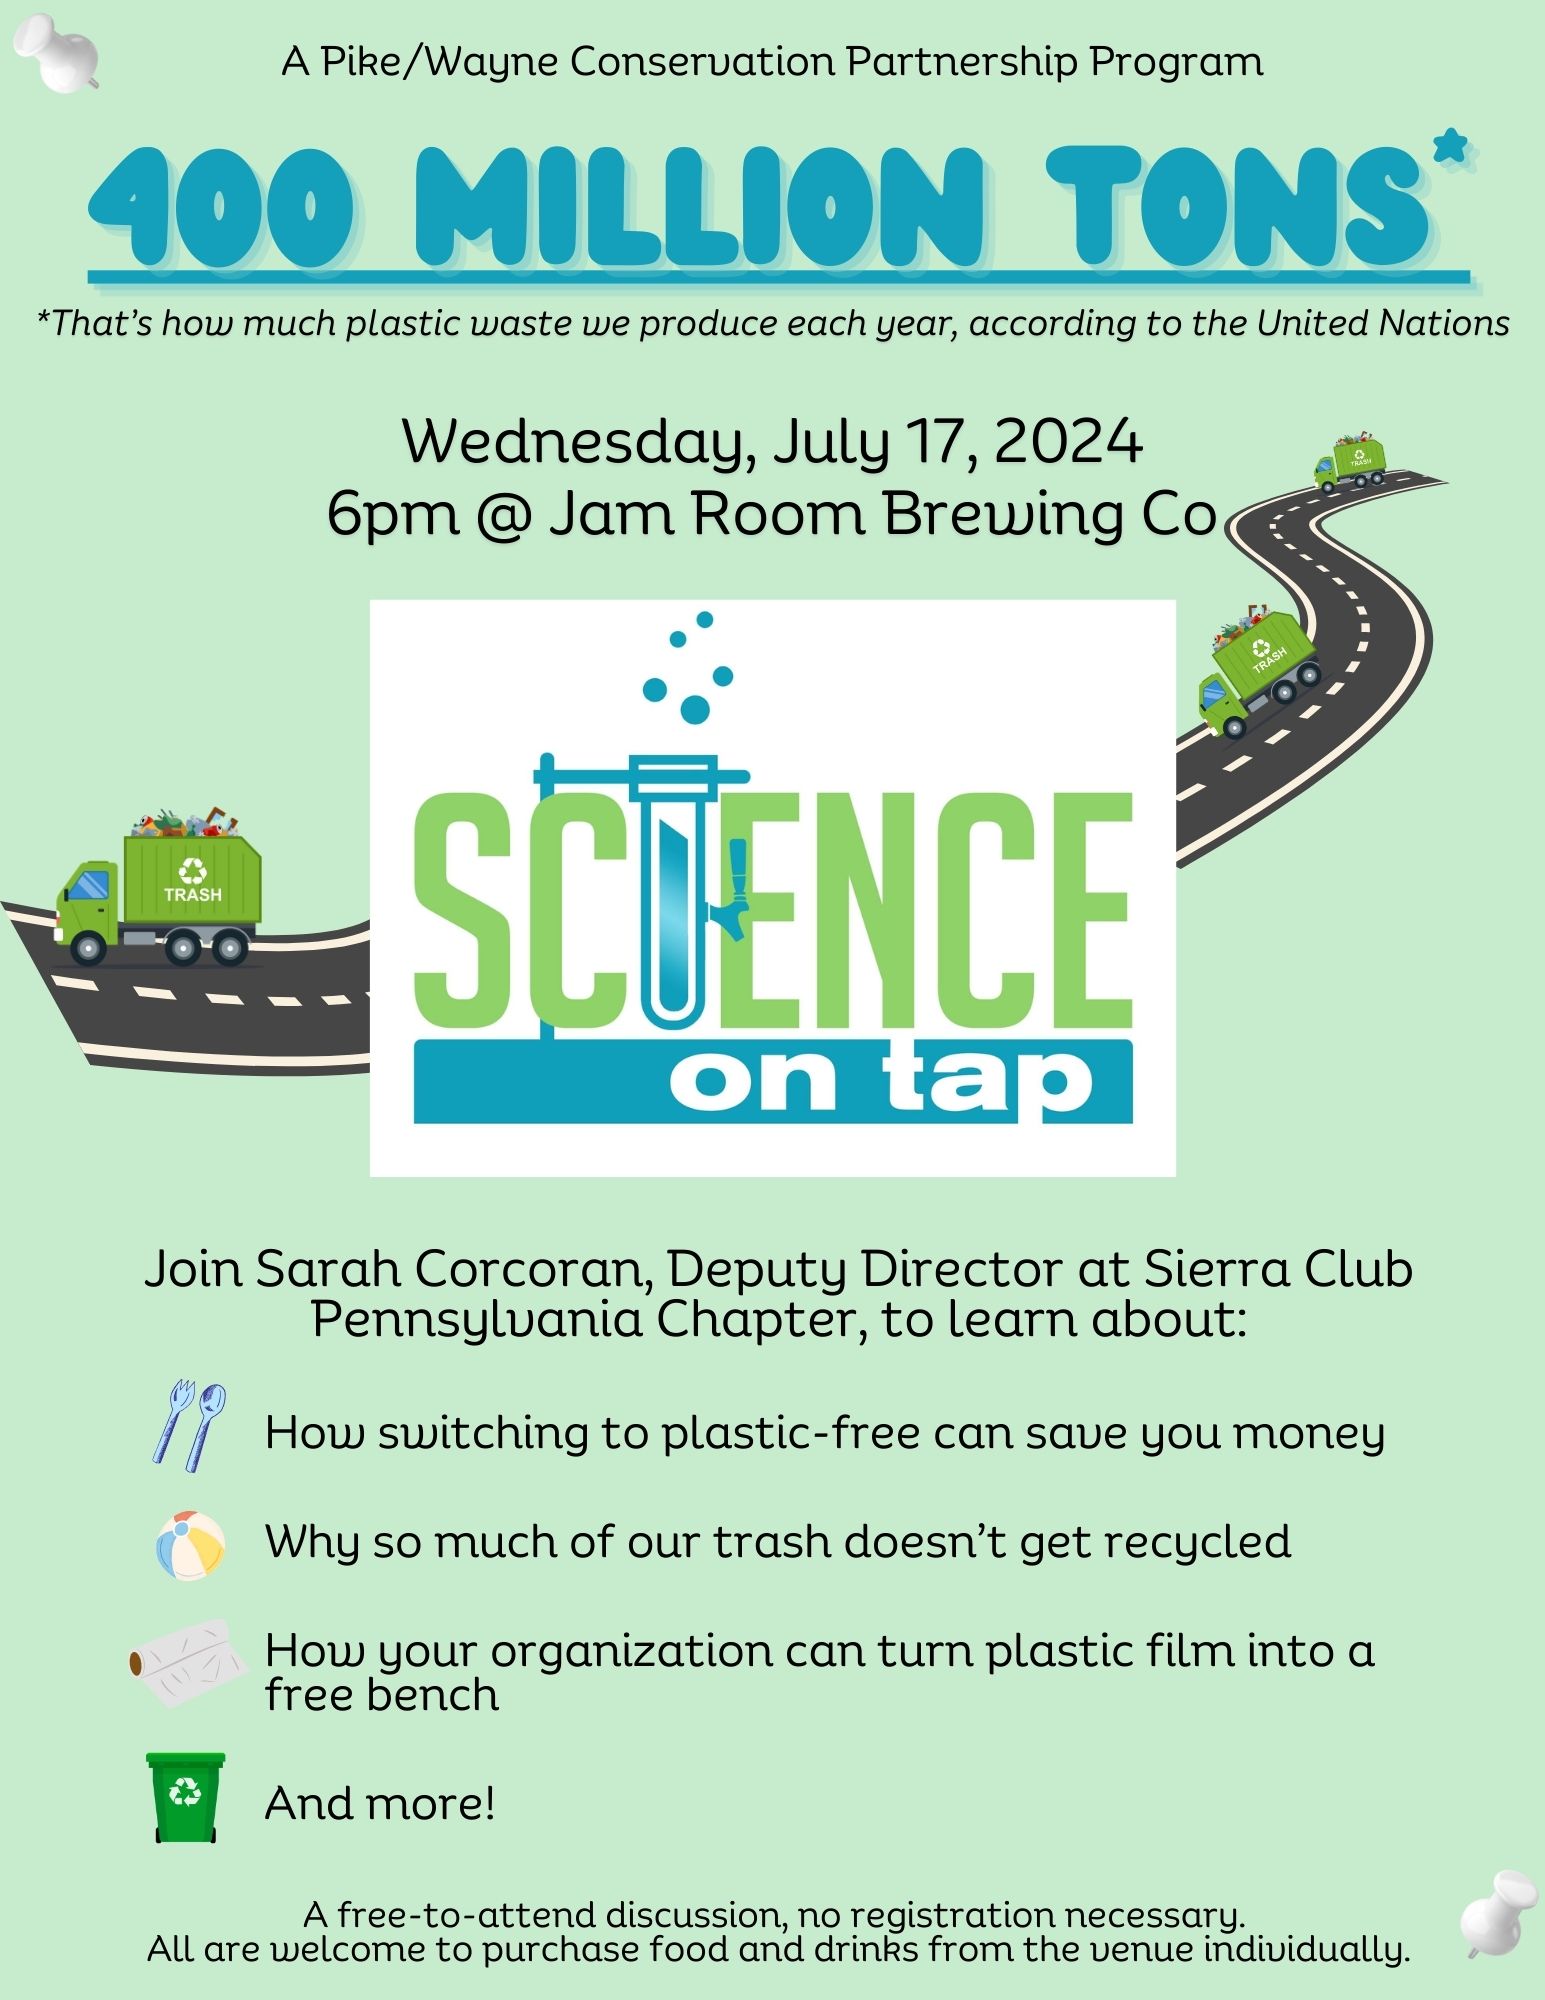 A flyer for a Science on Tap event with the text "400 Million Tons- *That’s how much plastic waste we produce each year, according to the United Nations. Wednesday, July 17, 2024, 6pm at Jam Room Brewing Company. A Pike/Wayne Conservation Partnership Program. Join Sarah Corcoran, Deputy Director at Sierra Club Pennsylvania Chapter, to learn about How switching to plastic-free can save you money; Why so much of our trash doesn’t get recycled; How your organization can turn plastic film into a free bench; and more! A free-to-attend discussion, no registration necessary. All are welcome to purchase food and drinks from the venue individually.